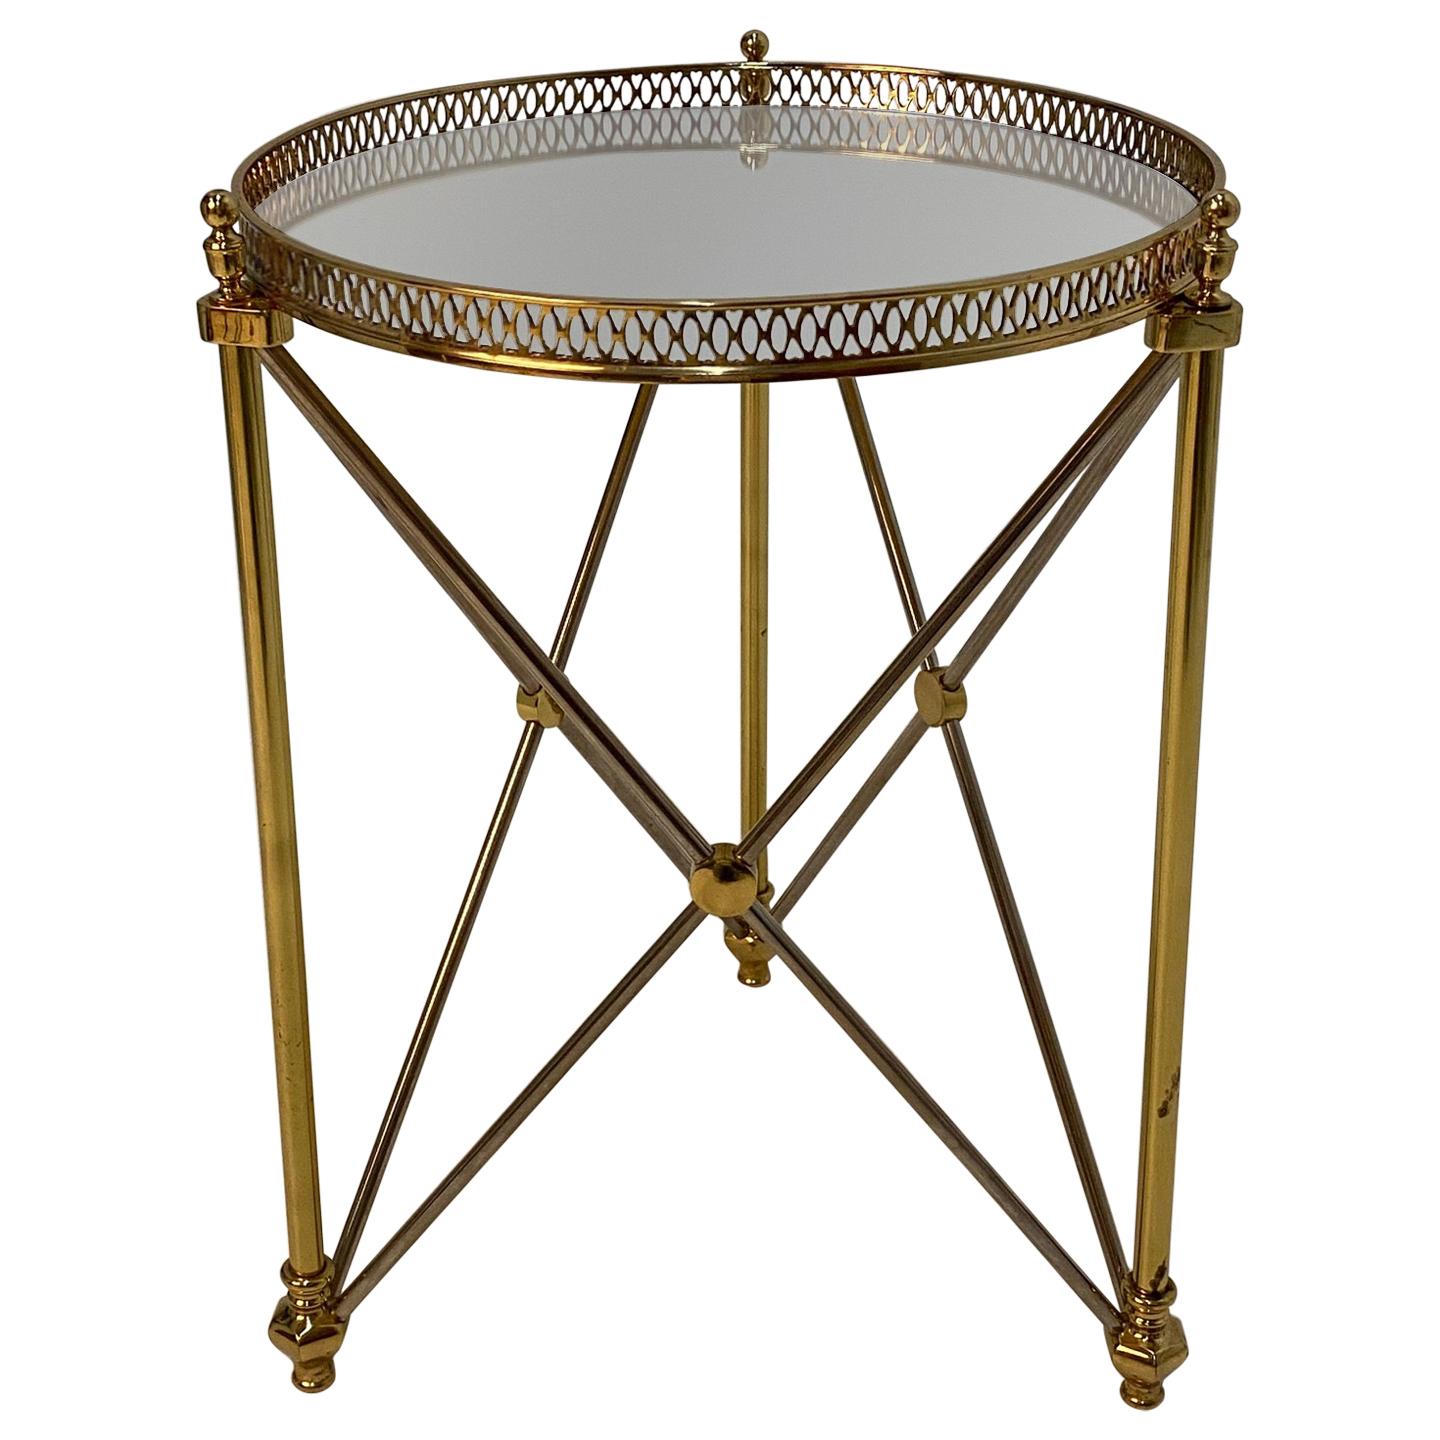 Elegant Polished Steel & Brass Neoclassical Round Martini Table